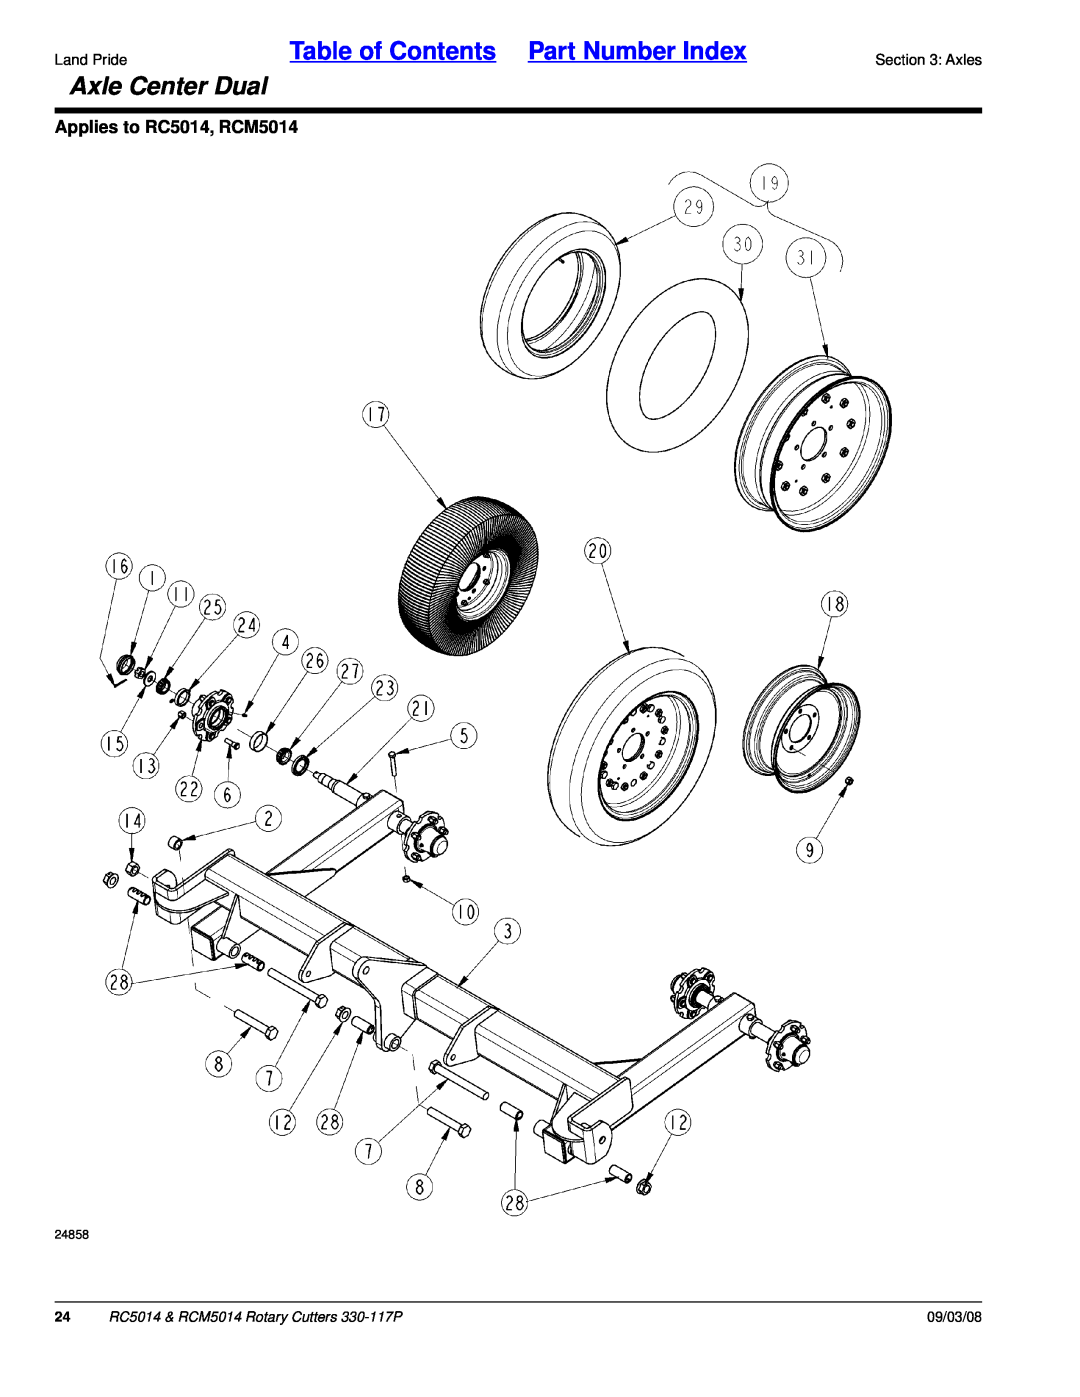 Land Pride manual Axle Center Dual, Table of Contents Part Number Index, Applies to RC5014, RCM5014, 09/03/08 